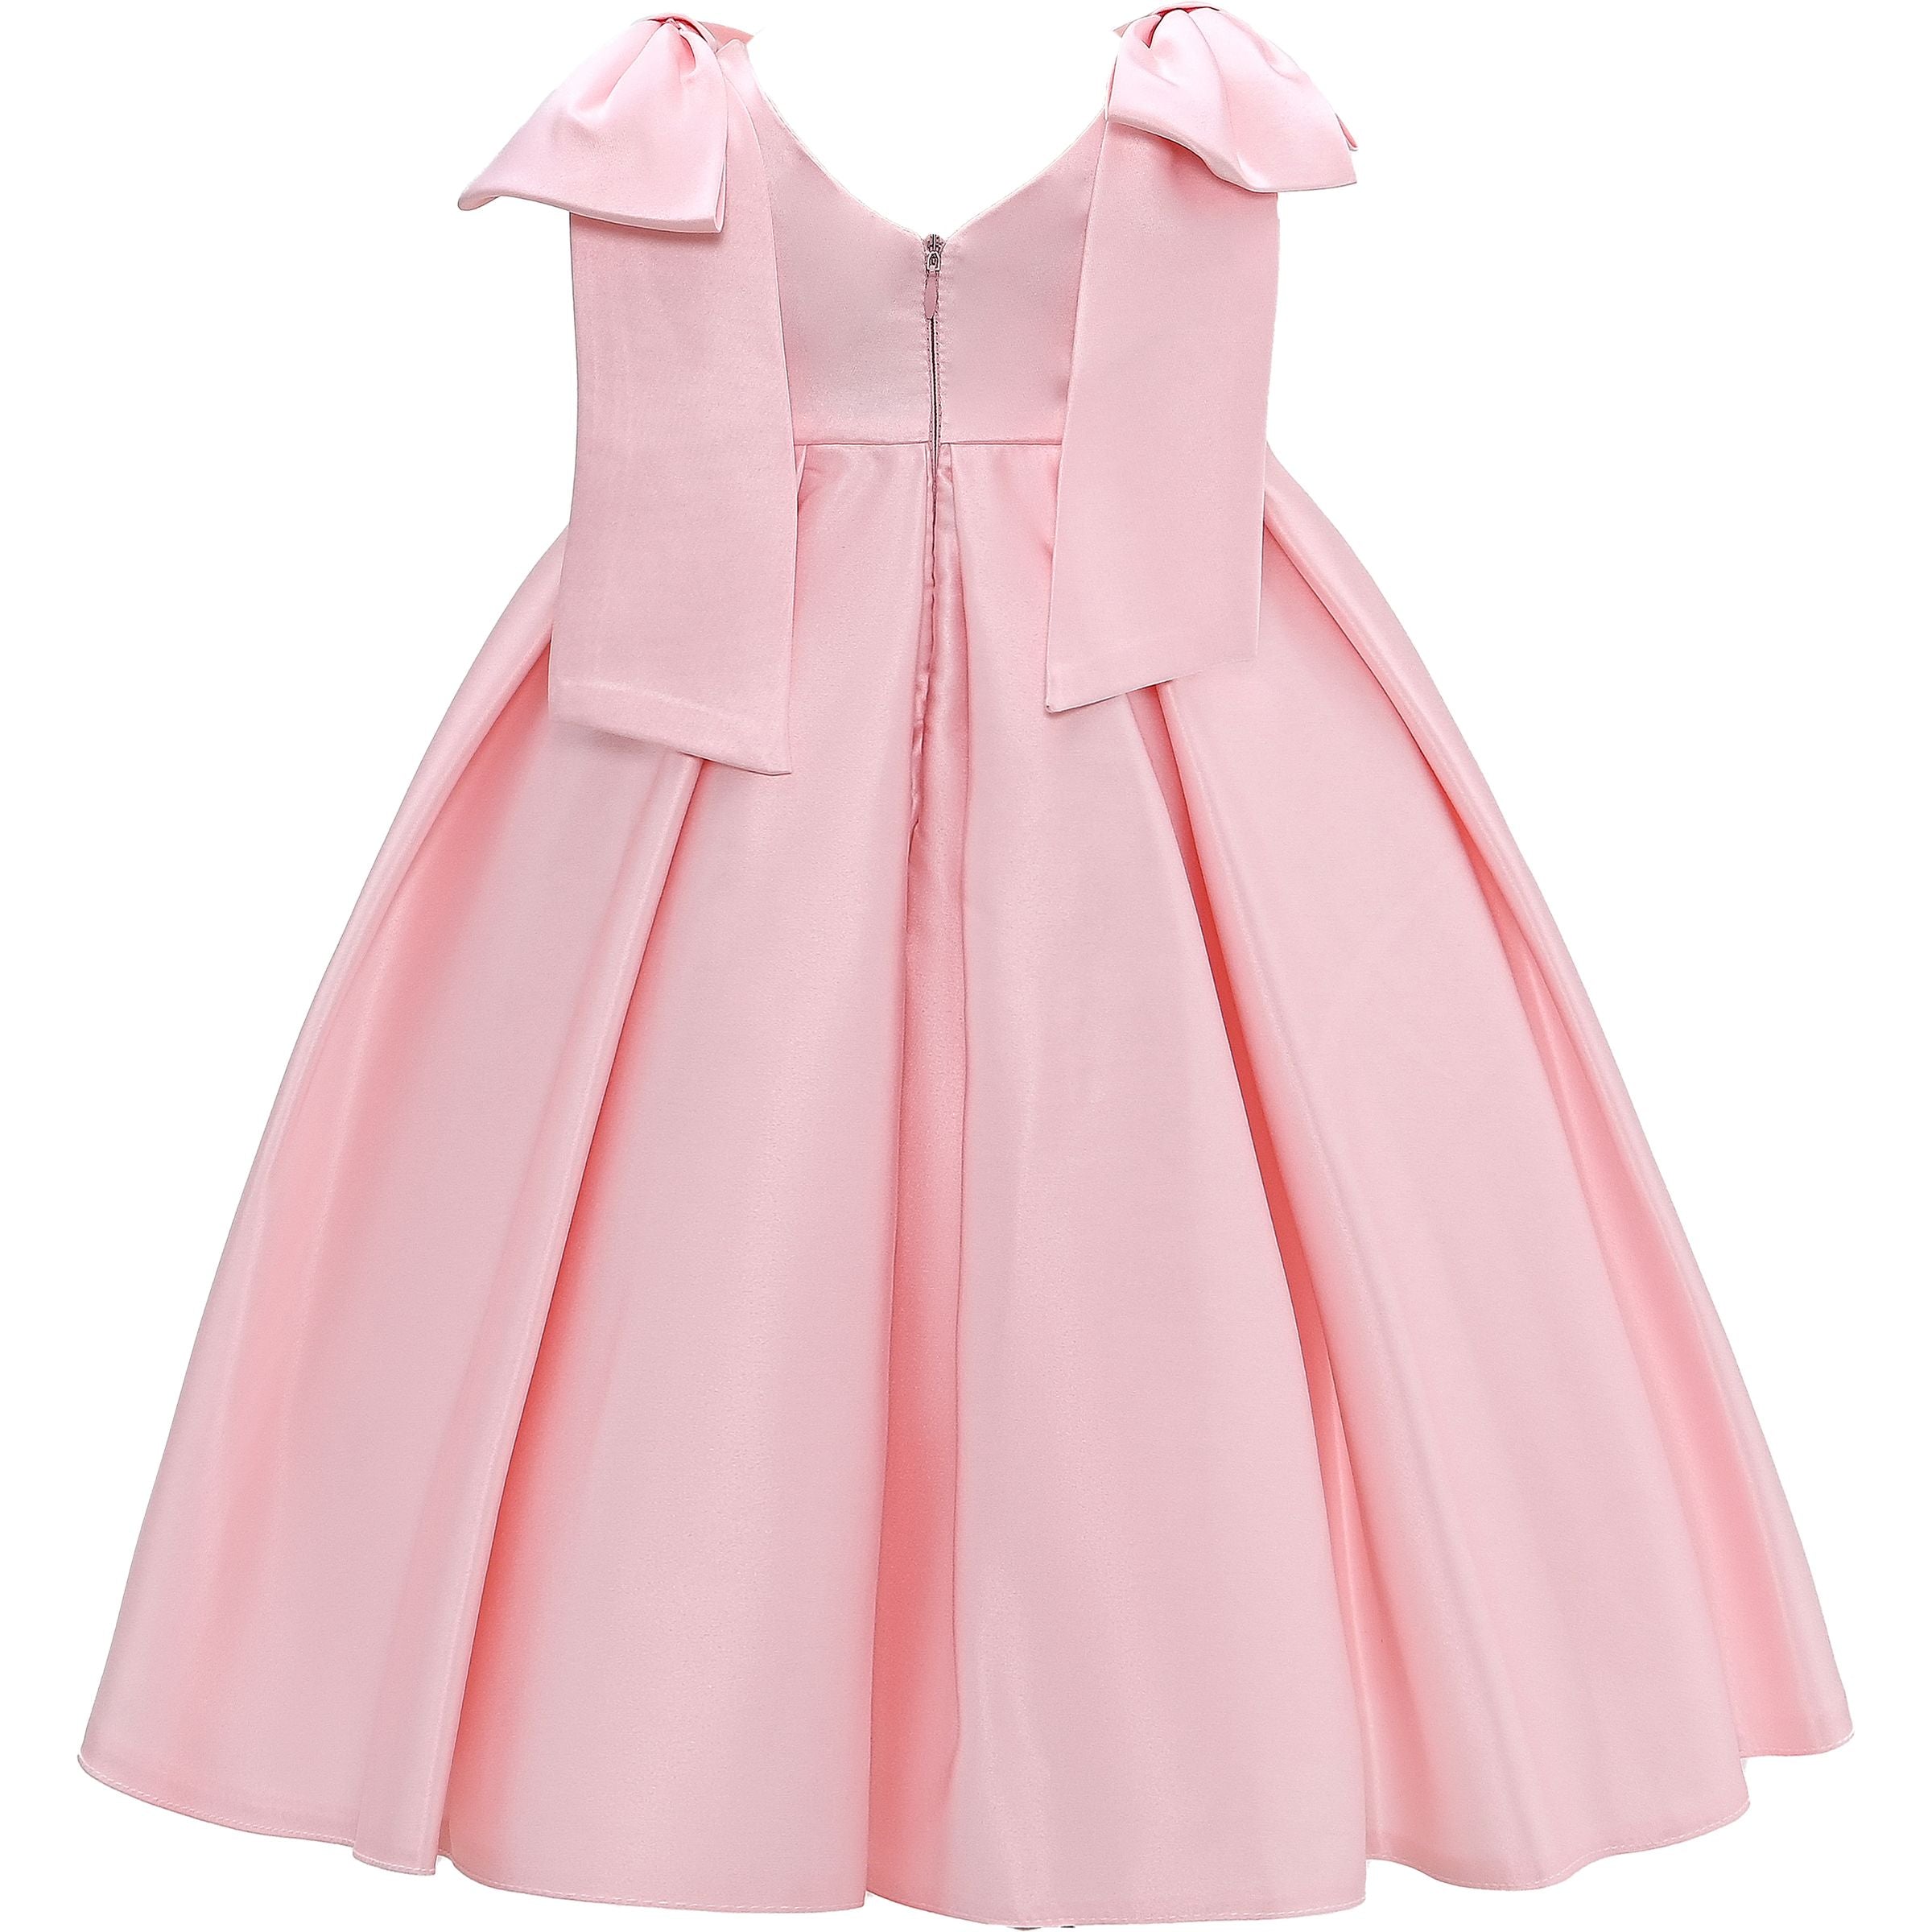 kids-atelier-tulleen-kid-girl-pink-palermo-satin-bow-pleated-dress-t9901-pink